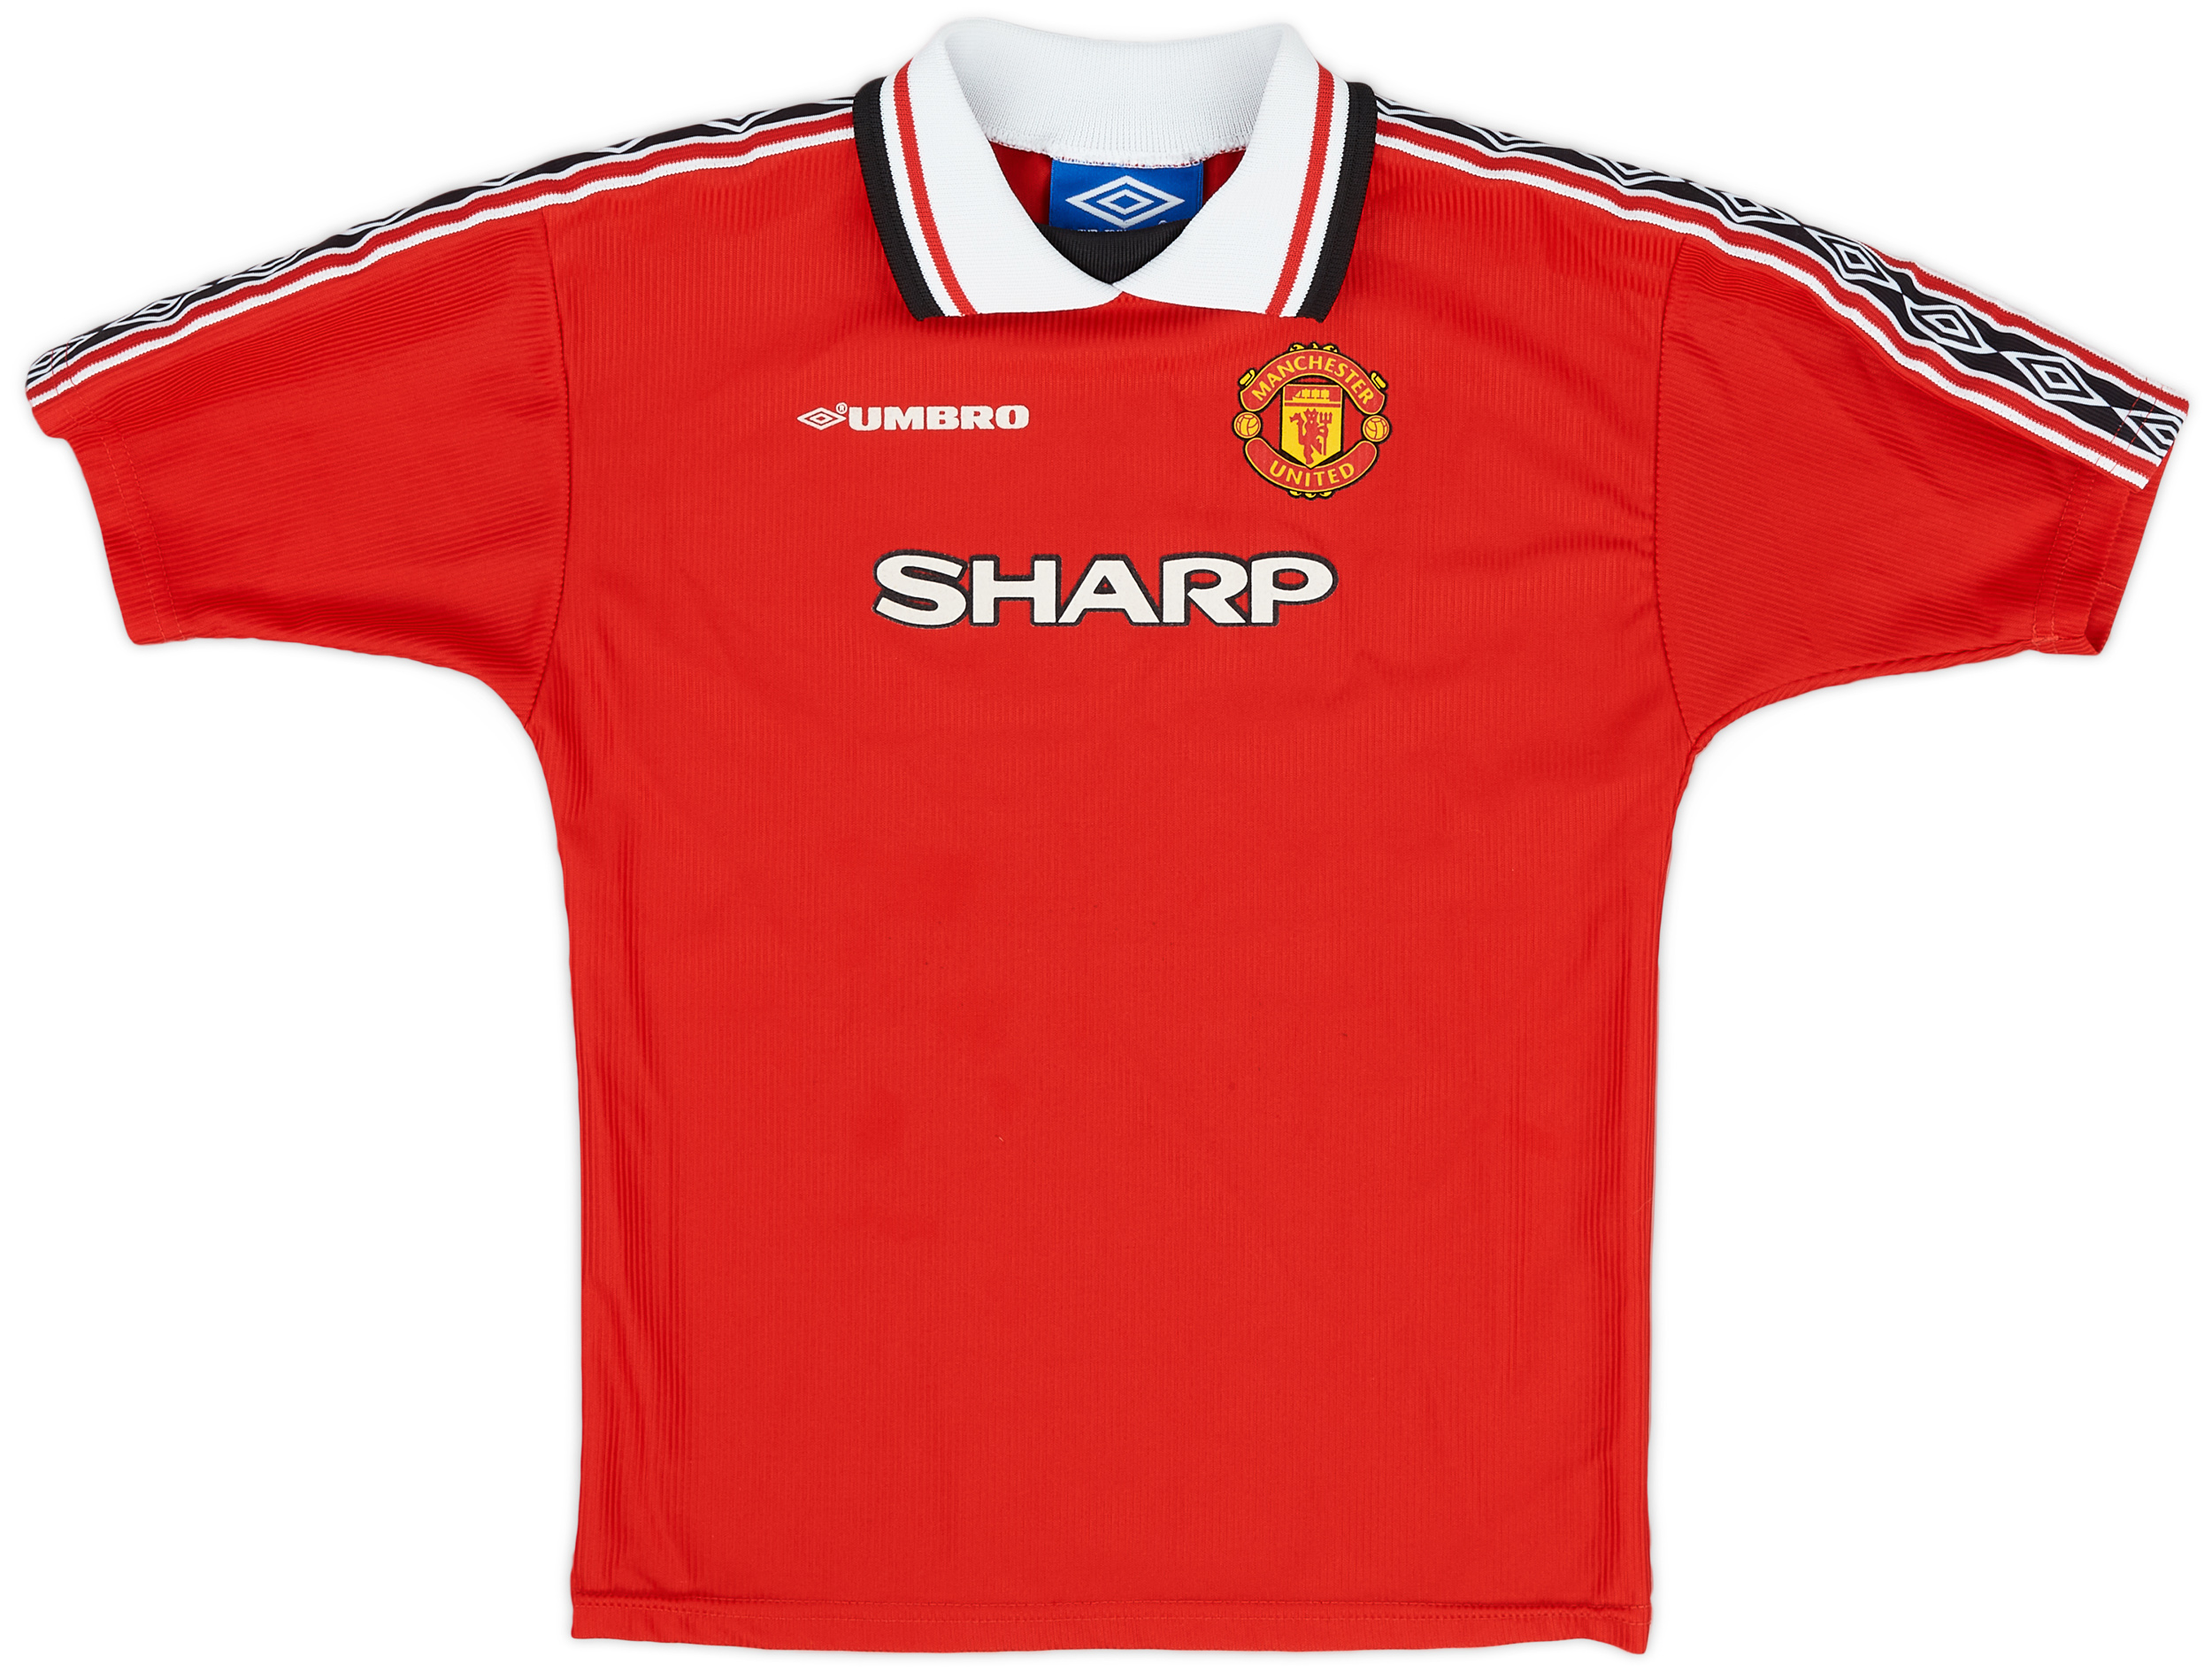 1998-00 Manchester United Home Shirt - 9/10 - (6-7Y)